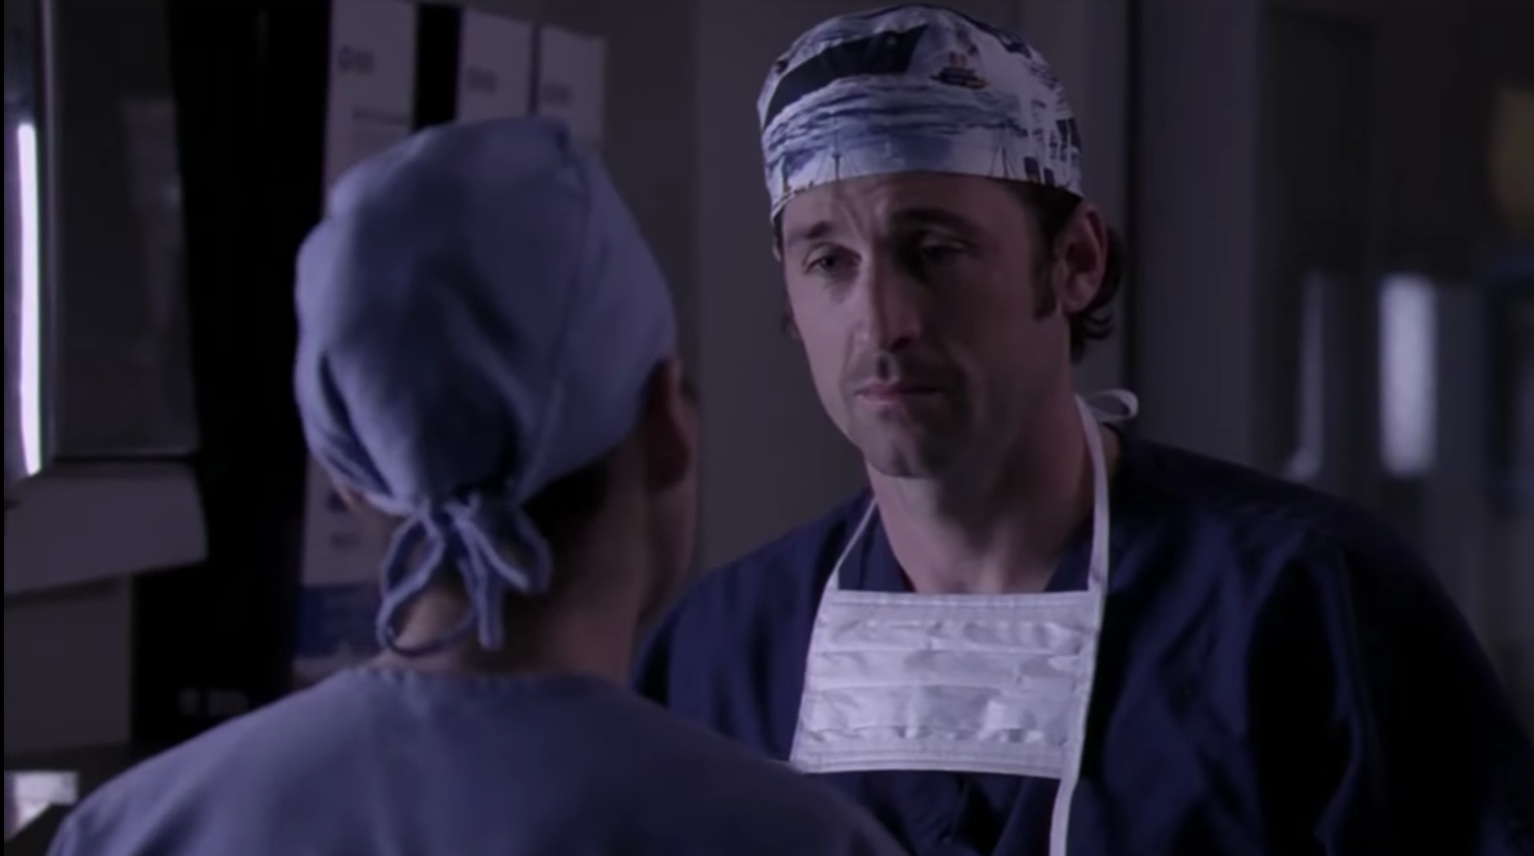 You Don't Need A McDreamy, You Need To Be Your Own Sun